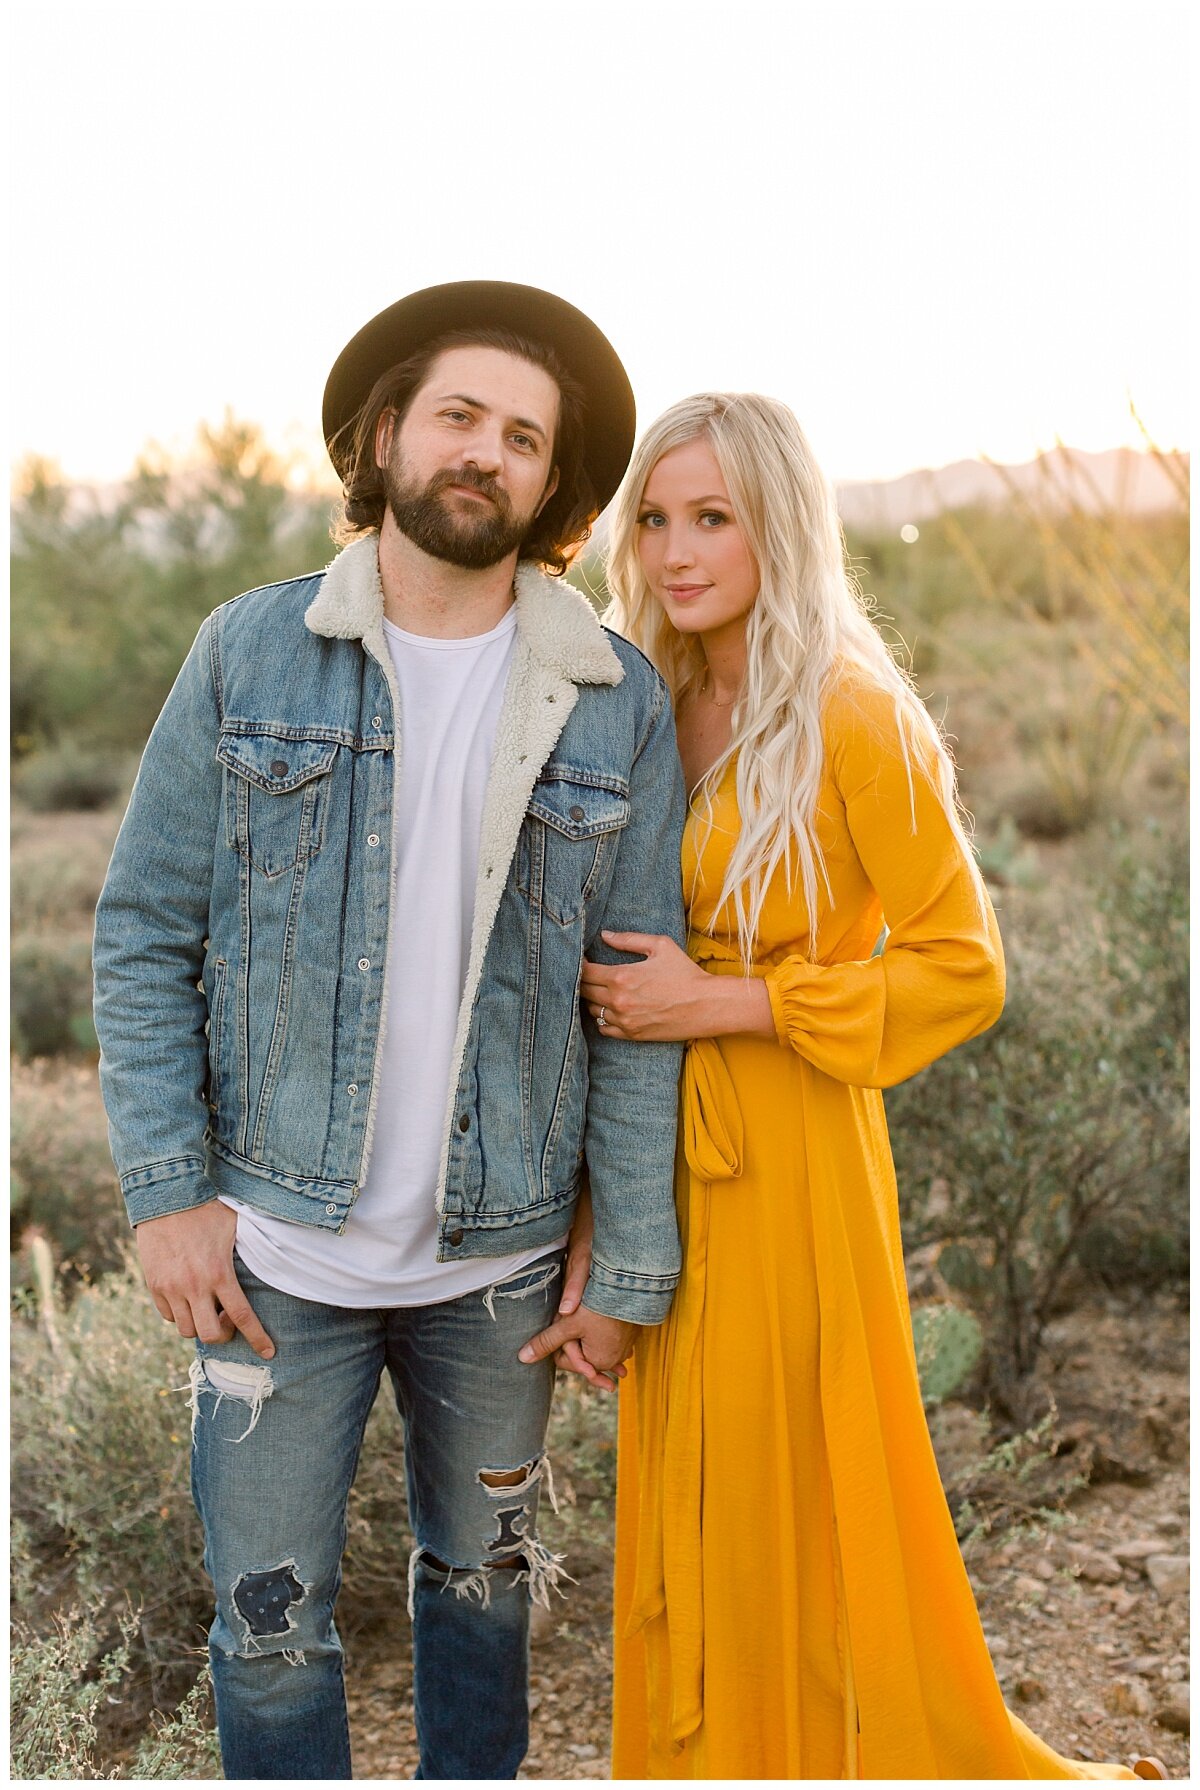 Denim jacket and hat paired with flowy yellow maxi dress for engagement session in Tucson Arizona